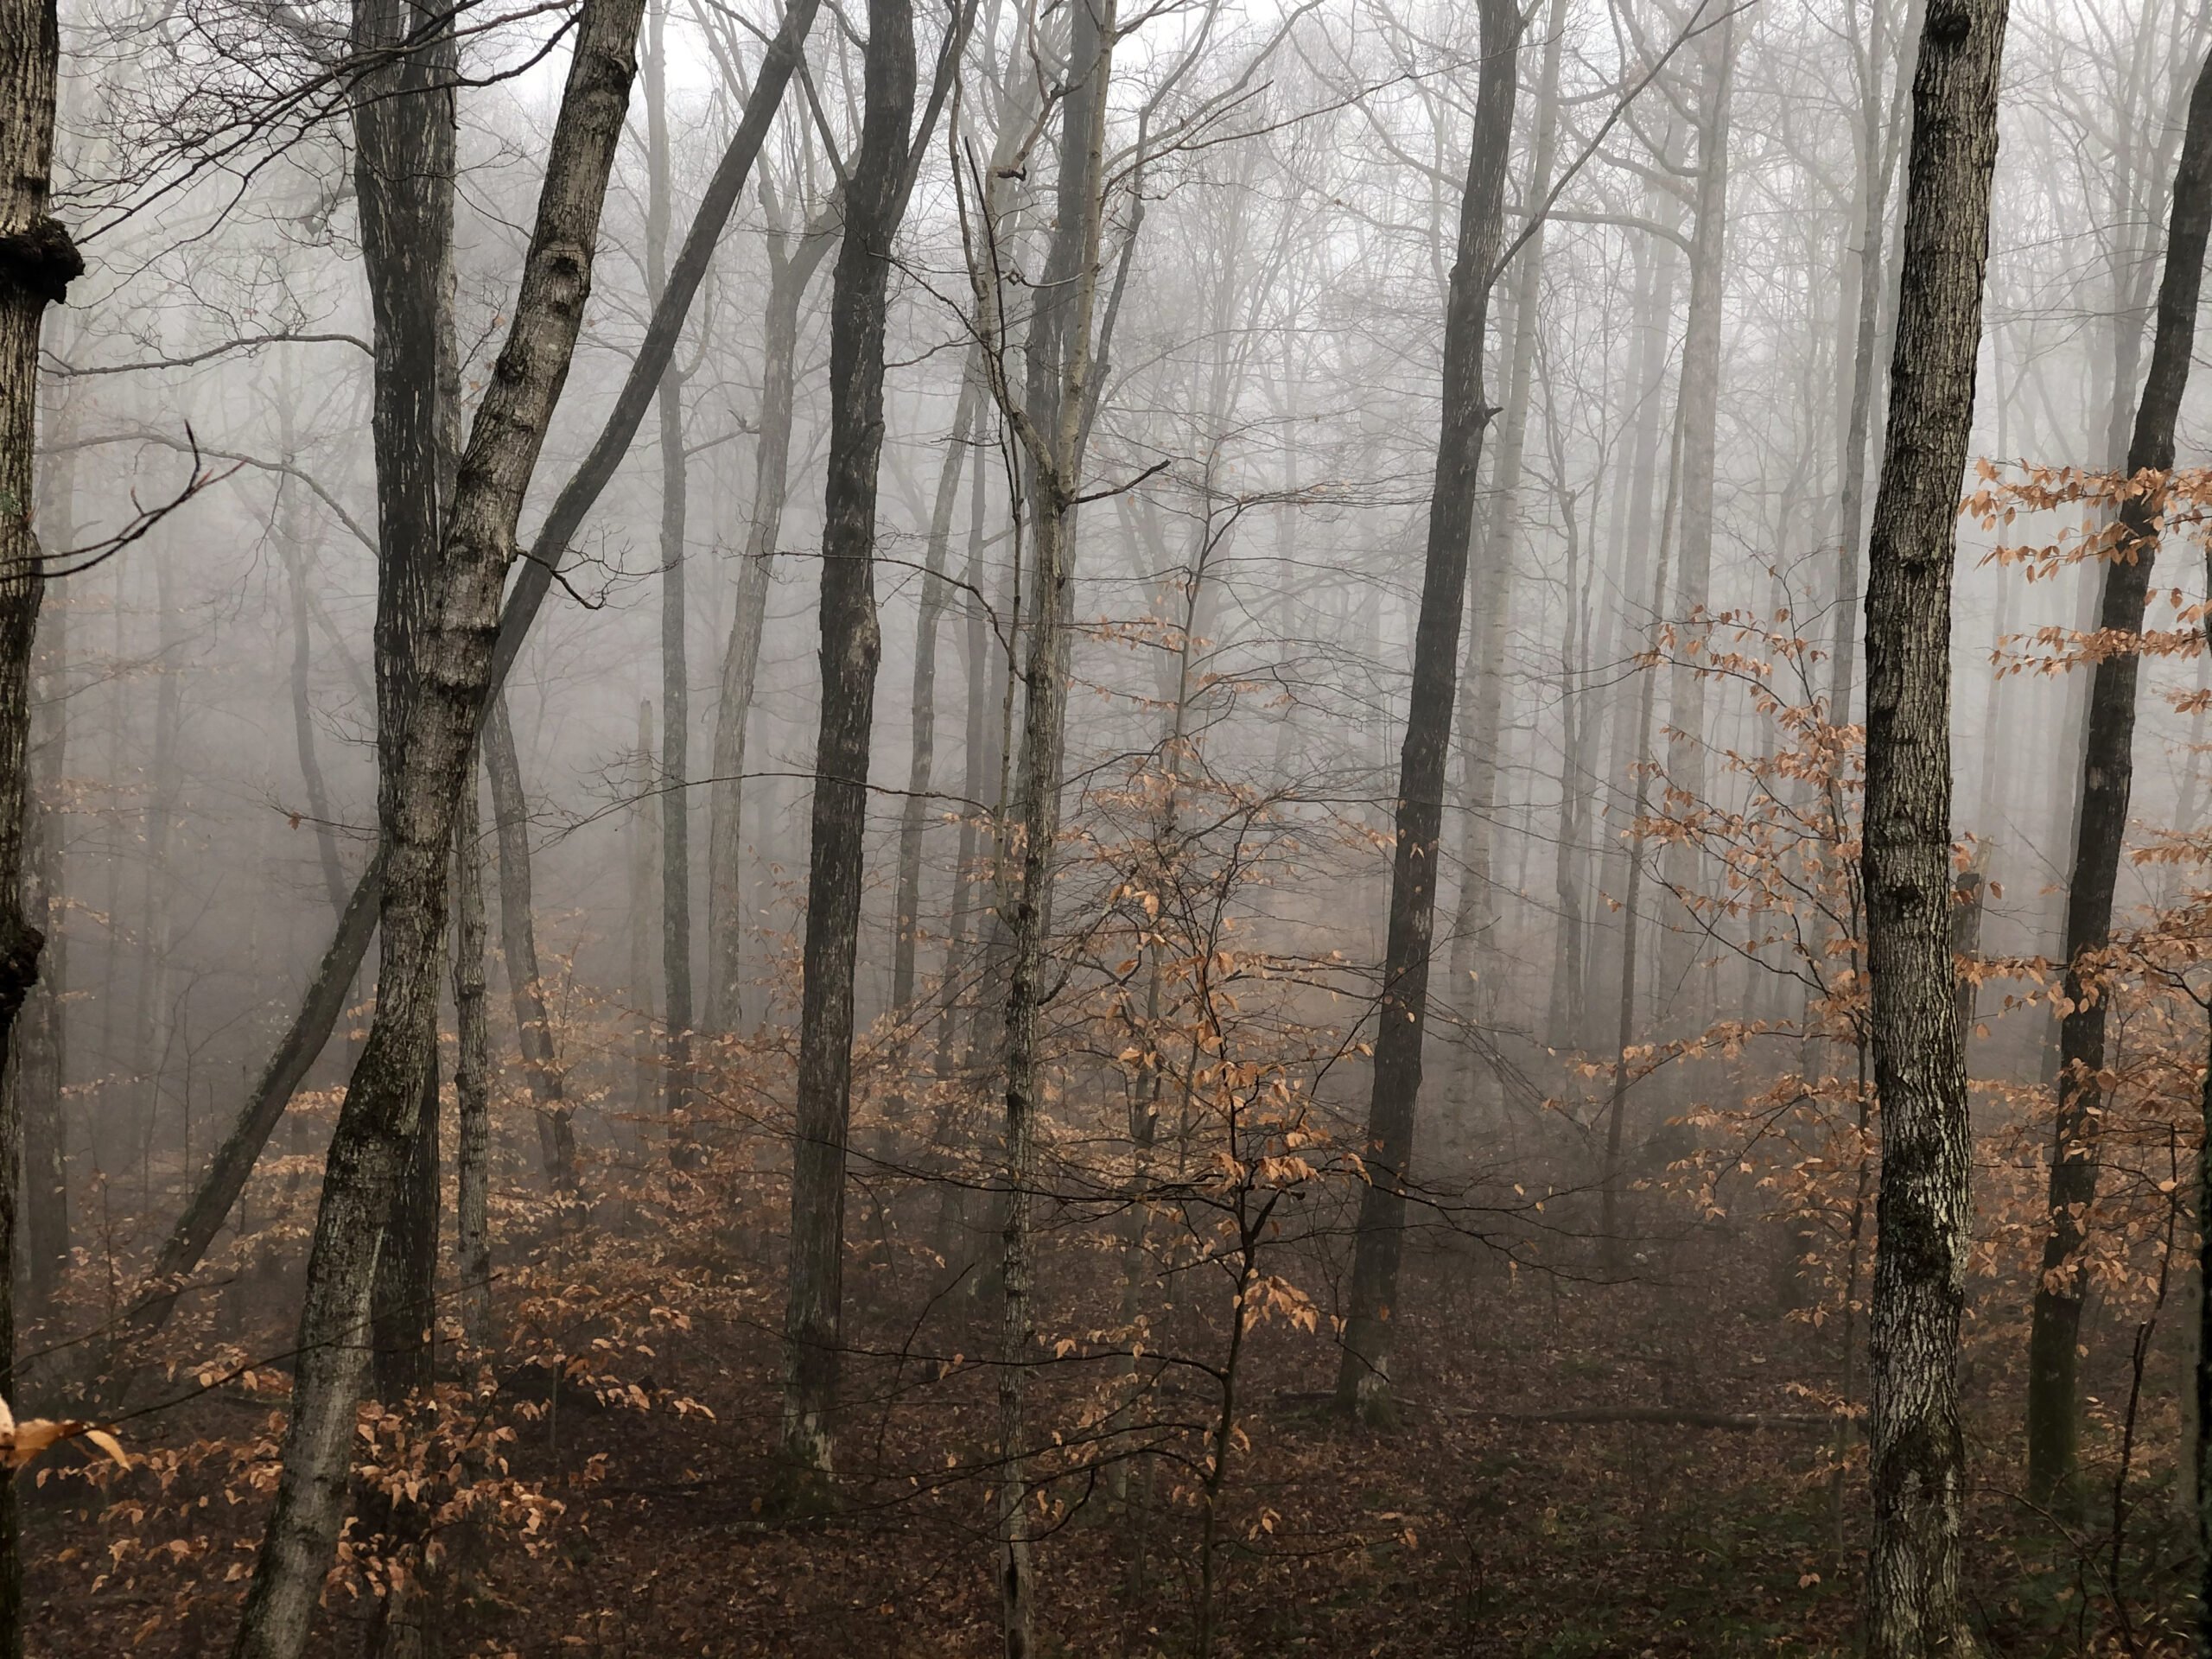 The misty woods on a foggy fall morning.